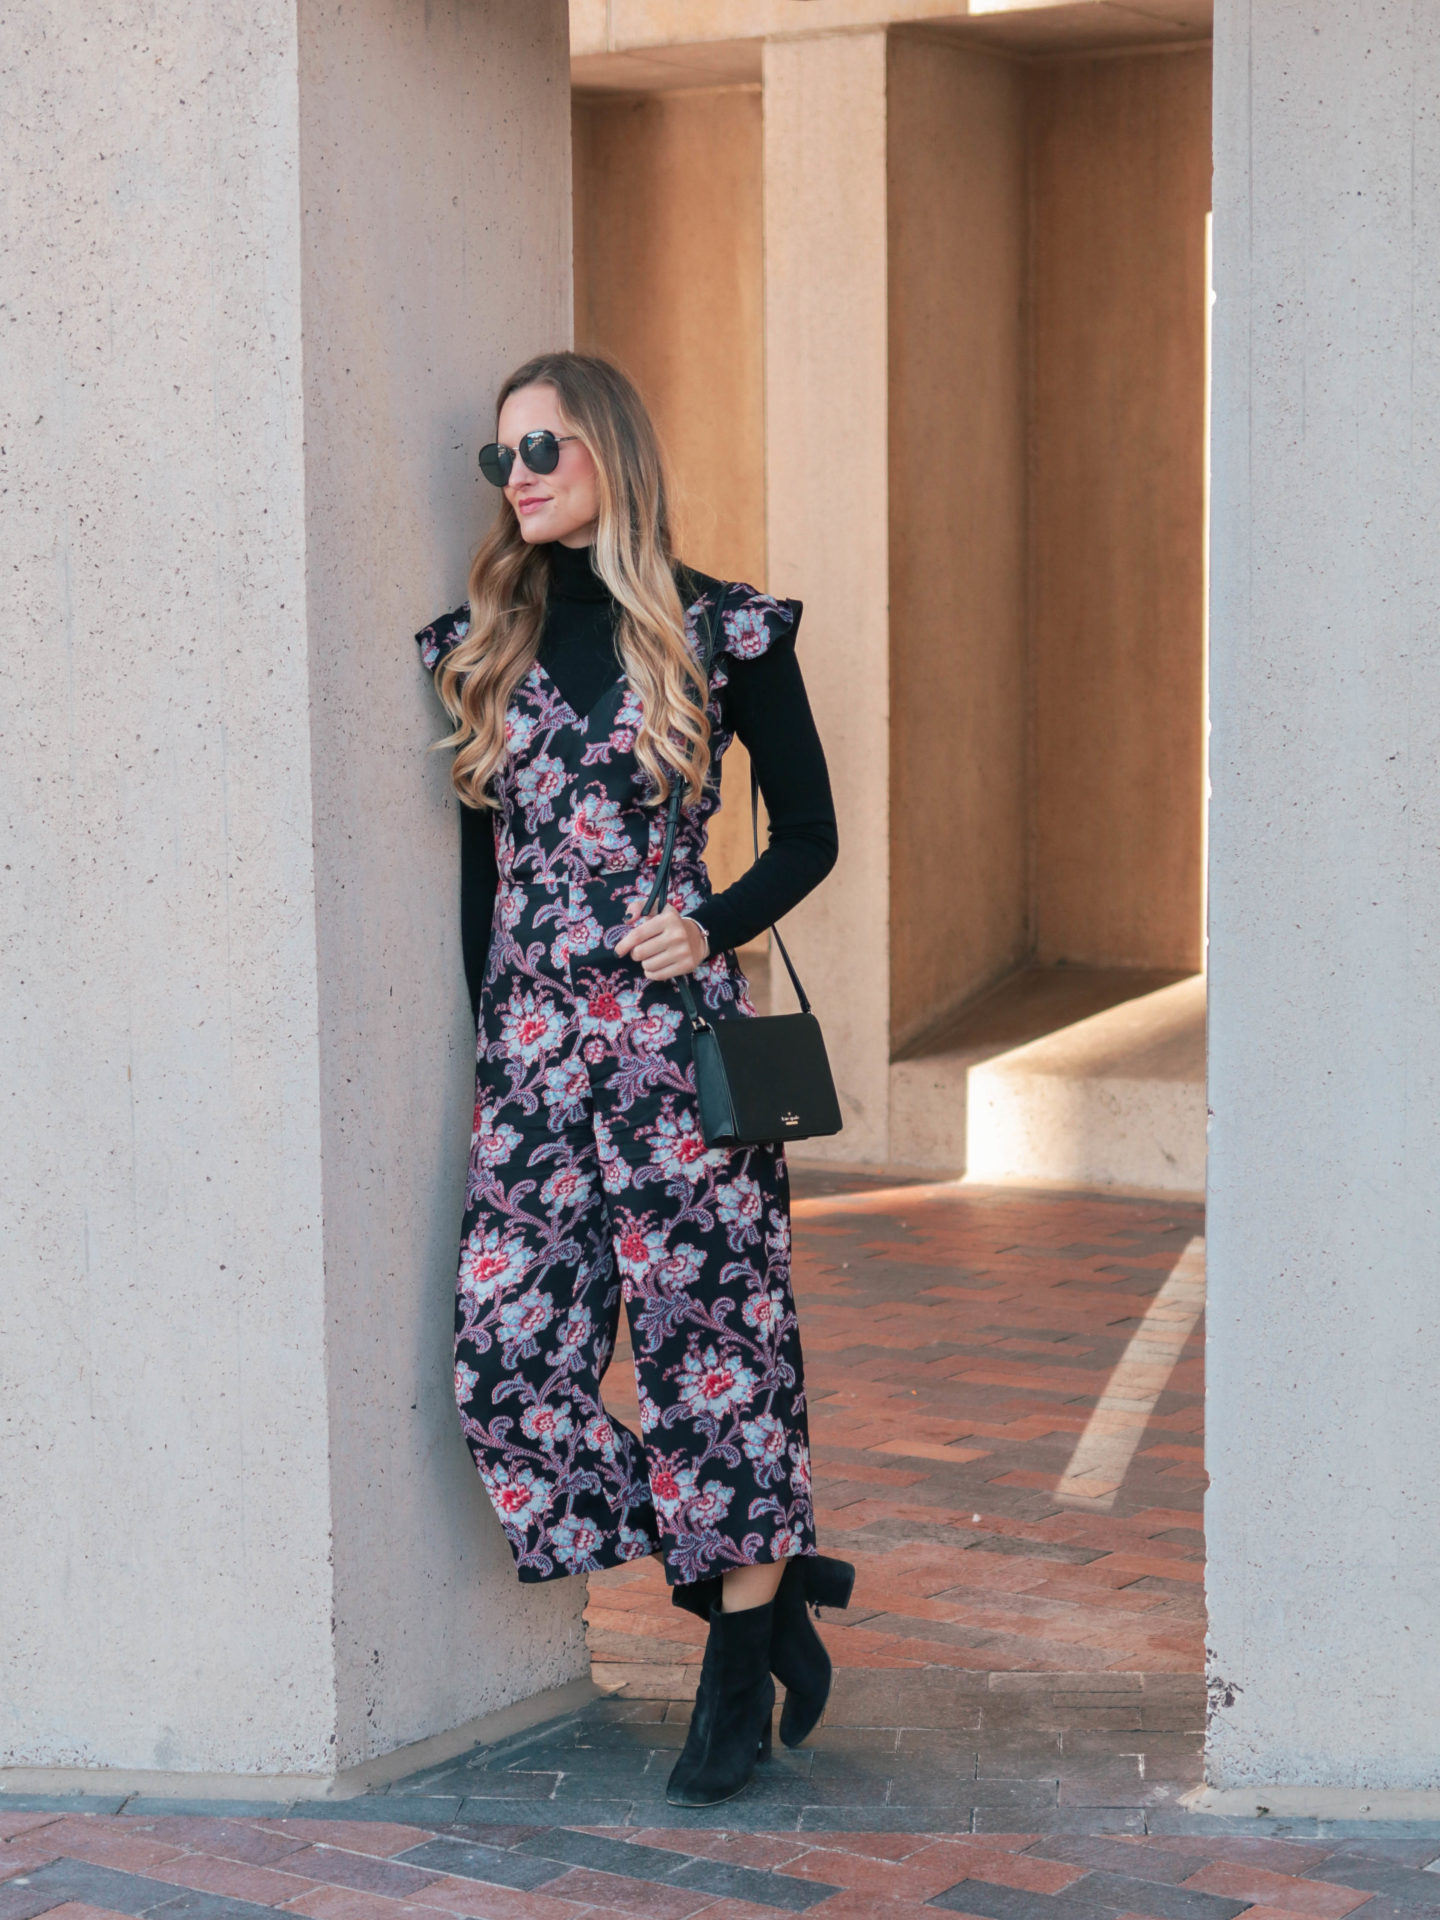 Fashion blogger, Leigha Gardner, of The Lilac Press wearing donning a black turtleneck to transition a floral jumper from warm weather wear to winter wear.